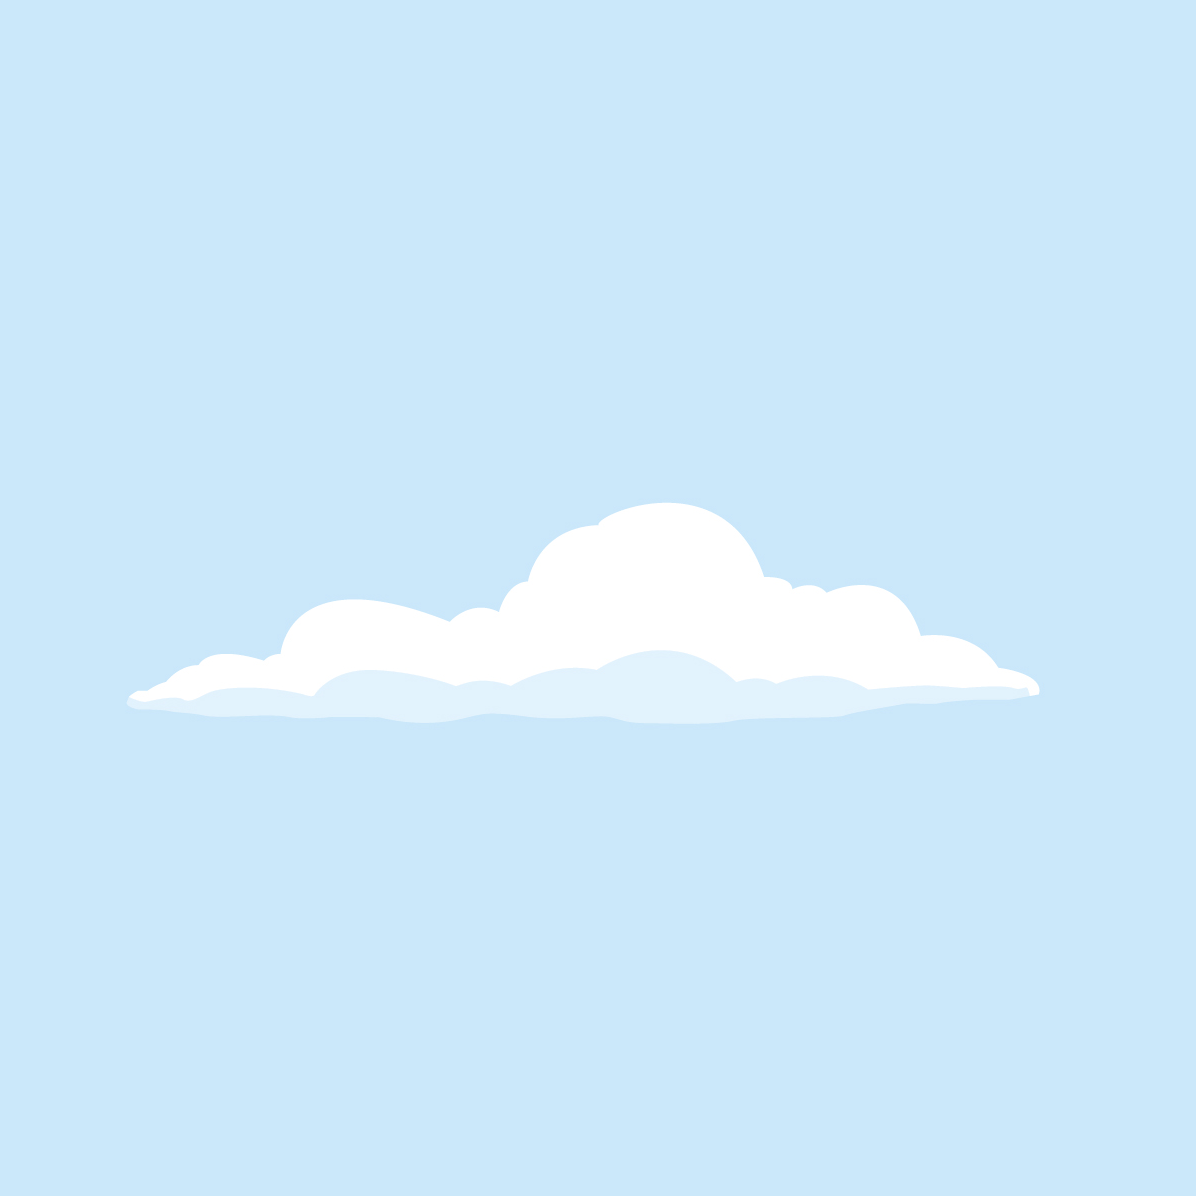 I Made A Minimialist Poster With Famous Drawn Clouds